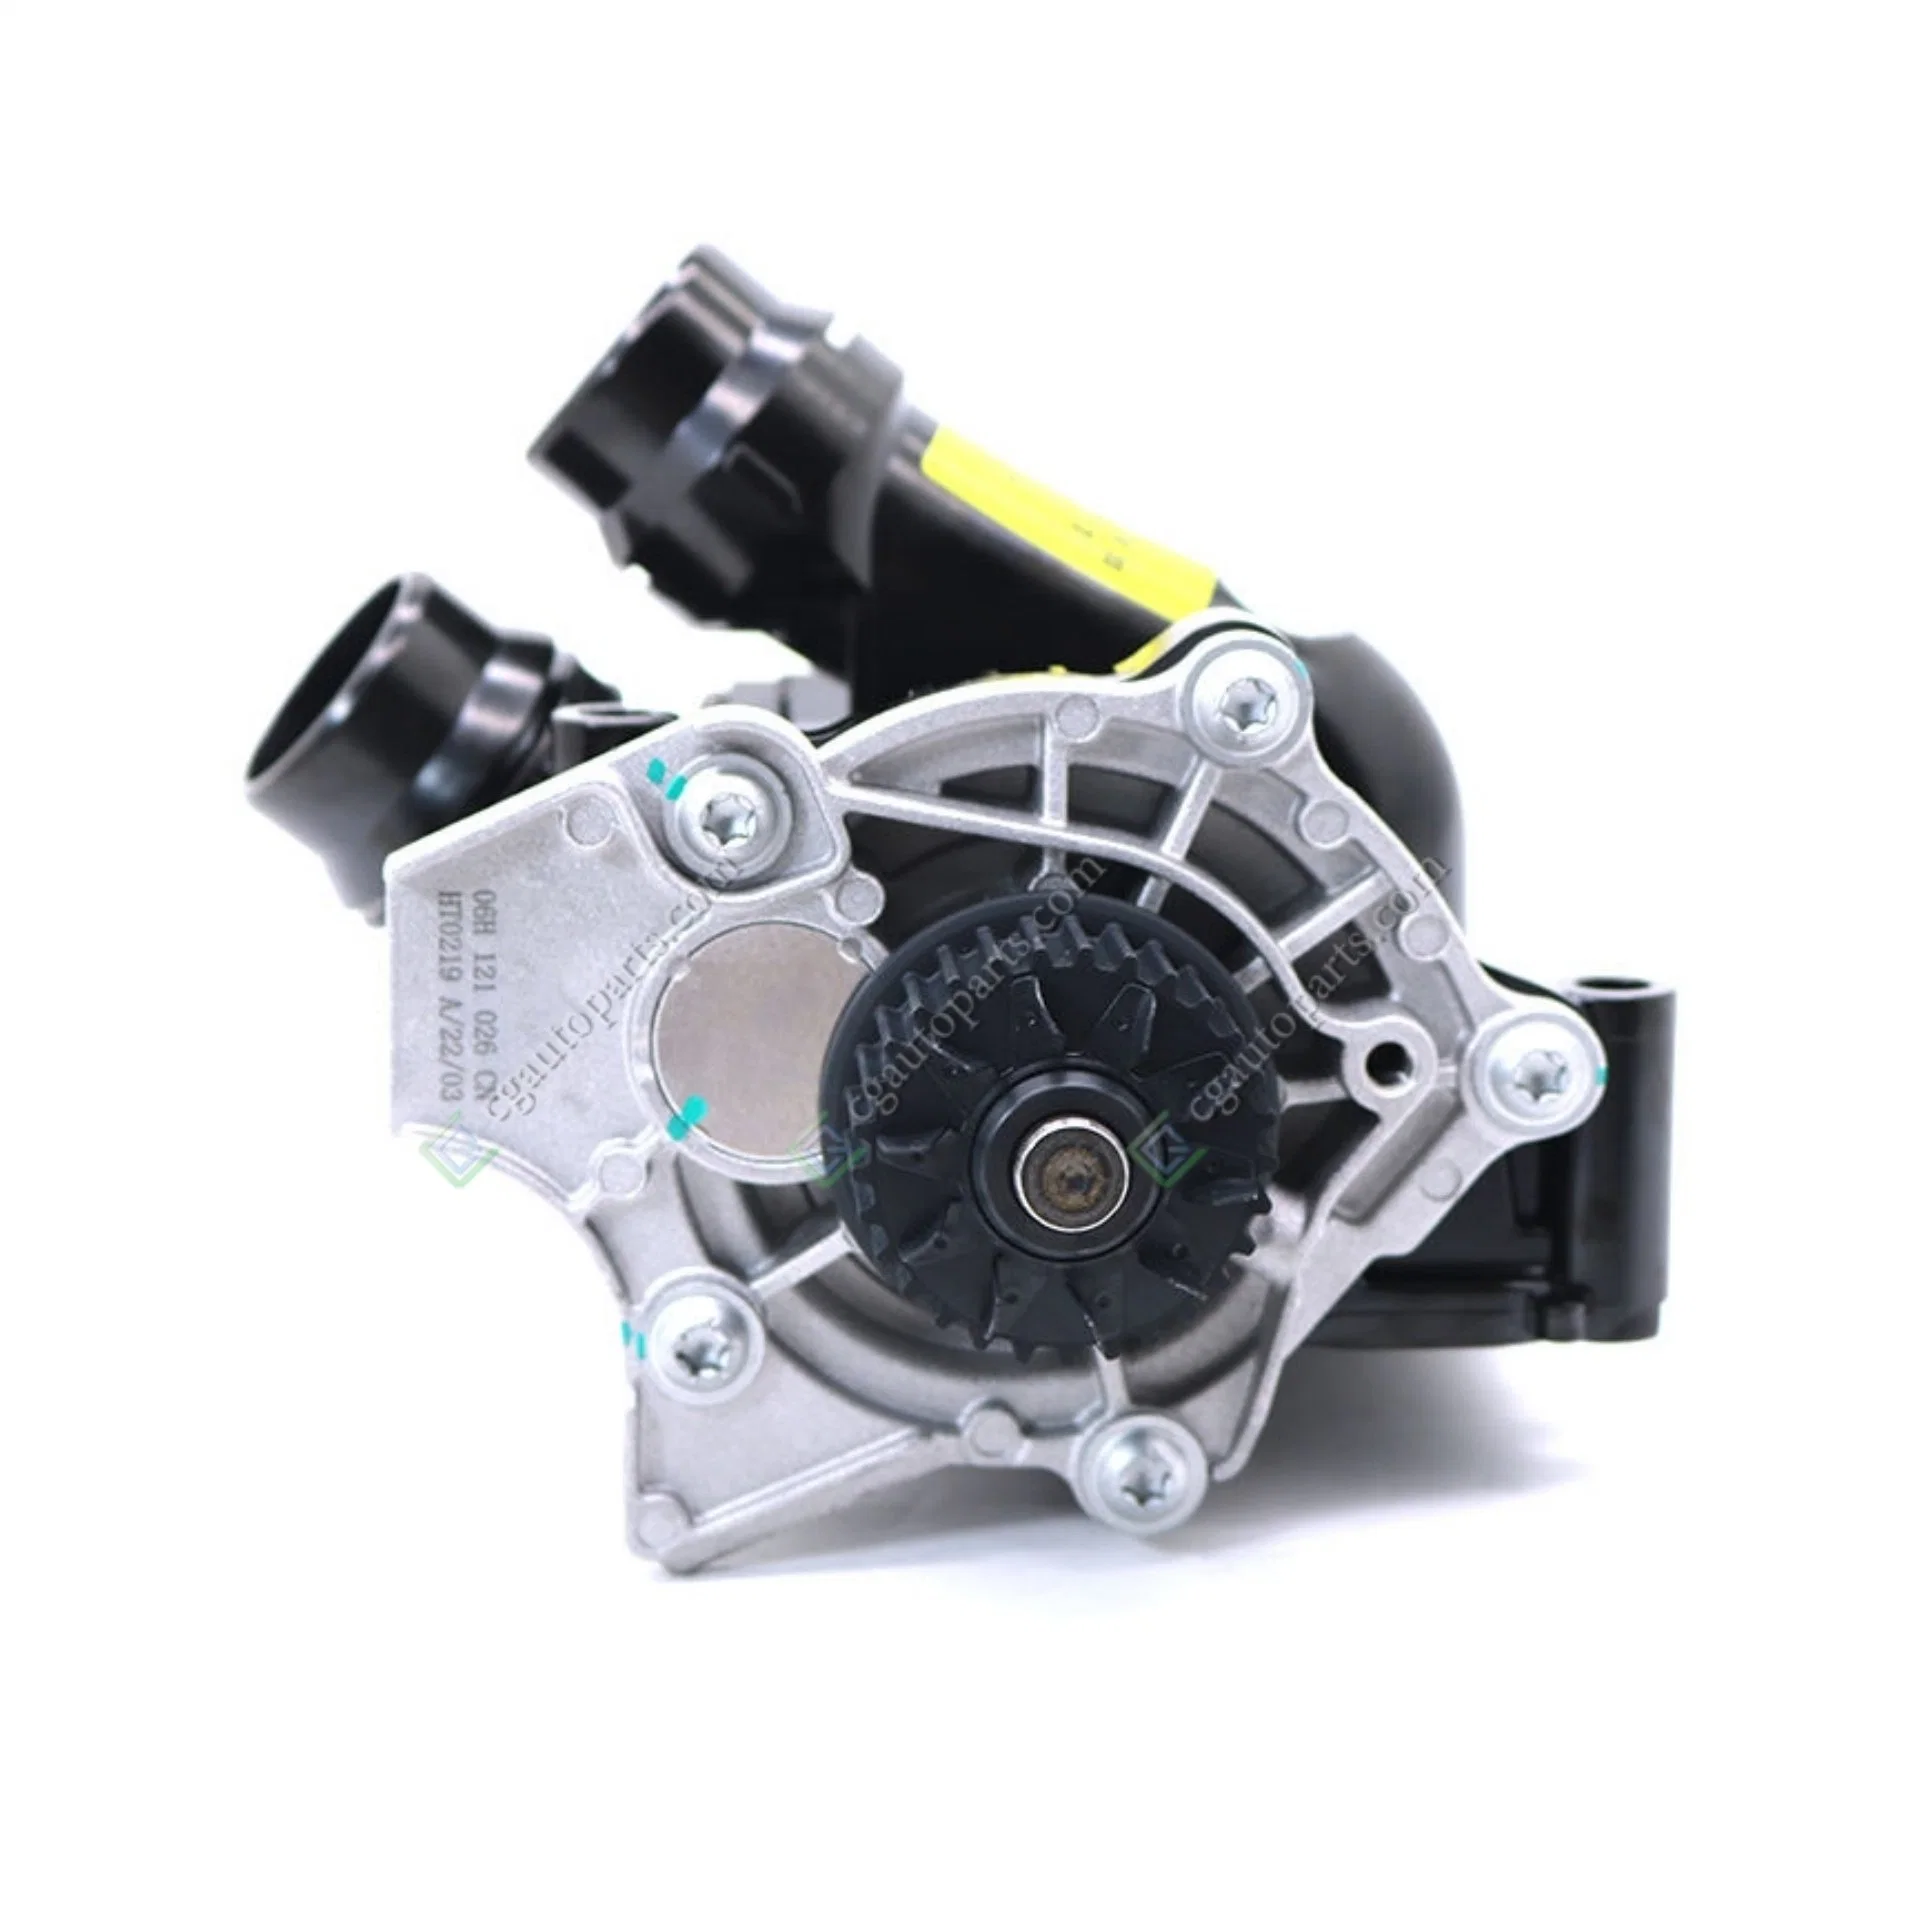 Car Cooling System Parts Engine Water Pump for Ea888 Engine OEM 06h121026cm for Audi A3s3 A4l Engine